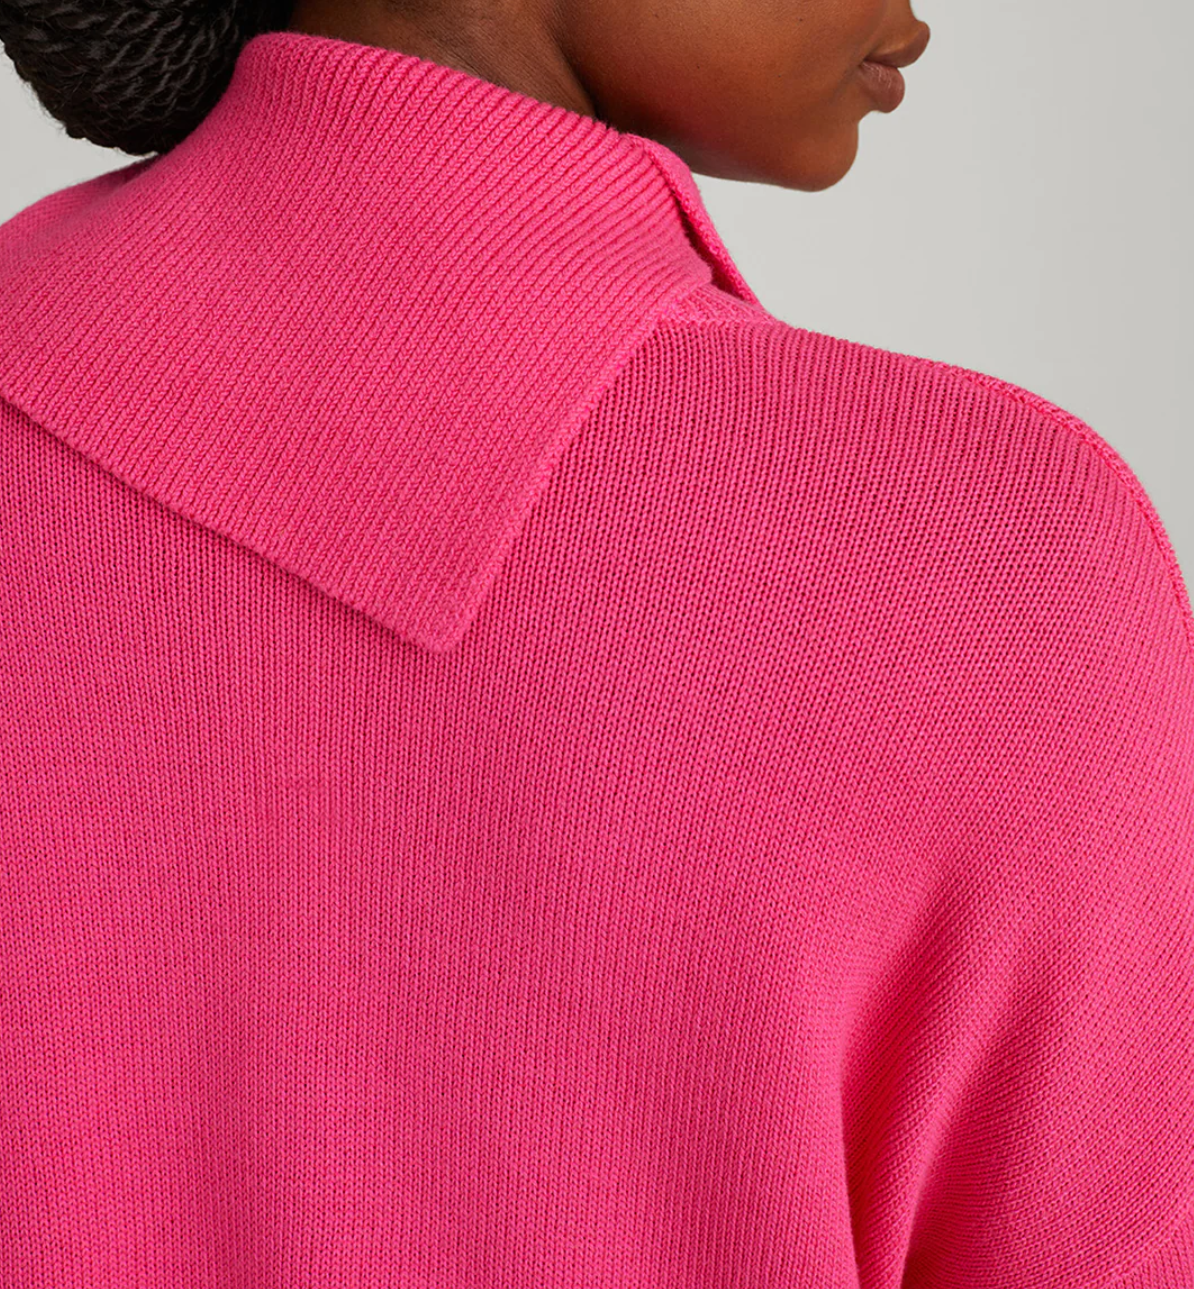 LILY SPLIT TURTLENECK SWEATER, BACK VIEW CLOSE UP OF COLLAR